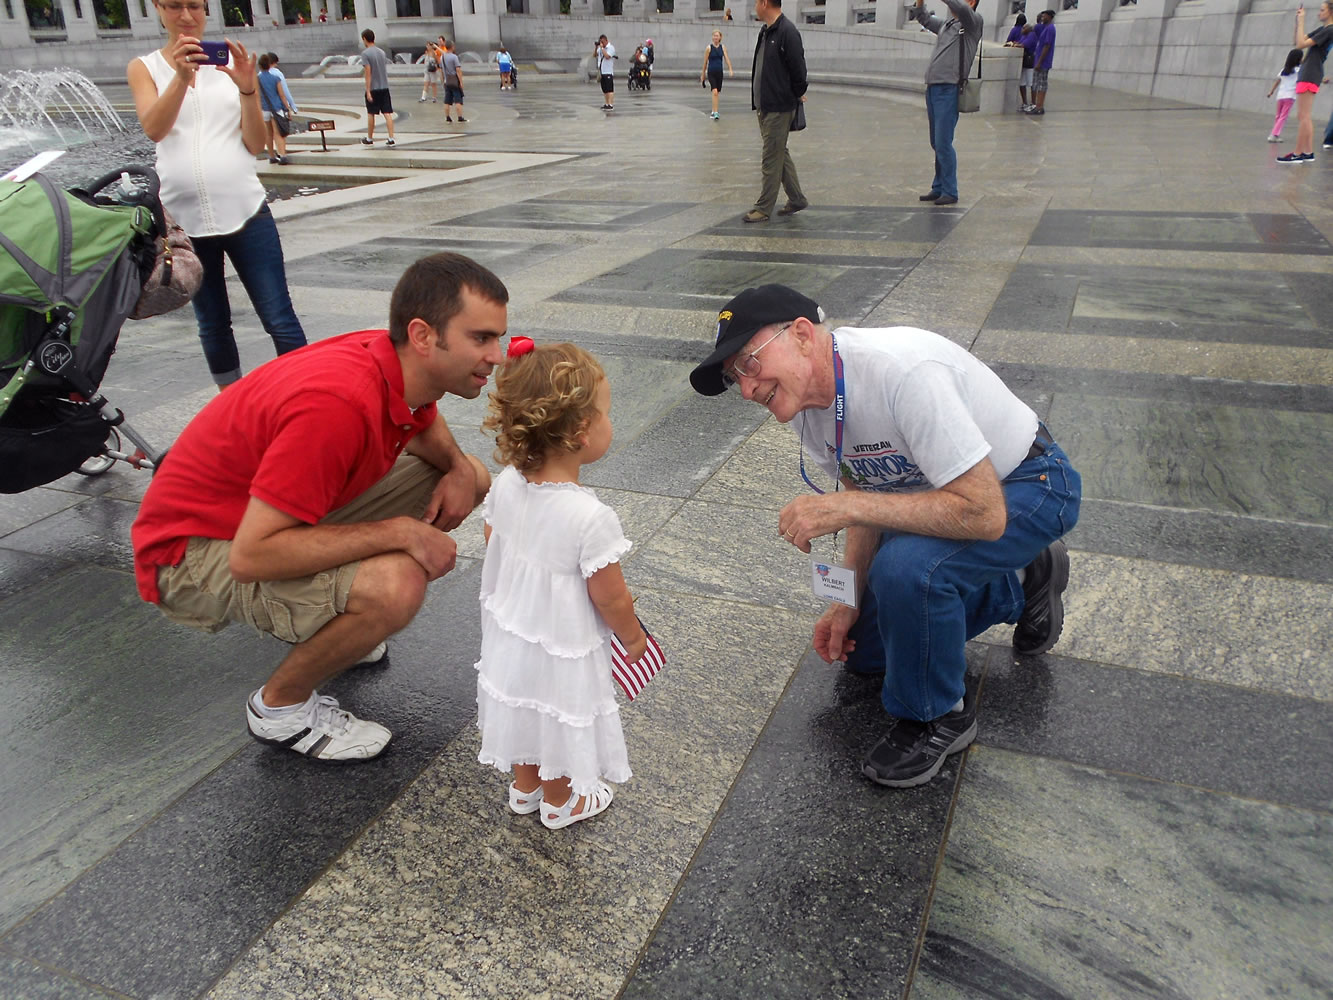 Wilbert Kalmbach, a World War II veteran, encountered a 2-year old girl with her parents at the WWII Memorial, in Washington, D.C.